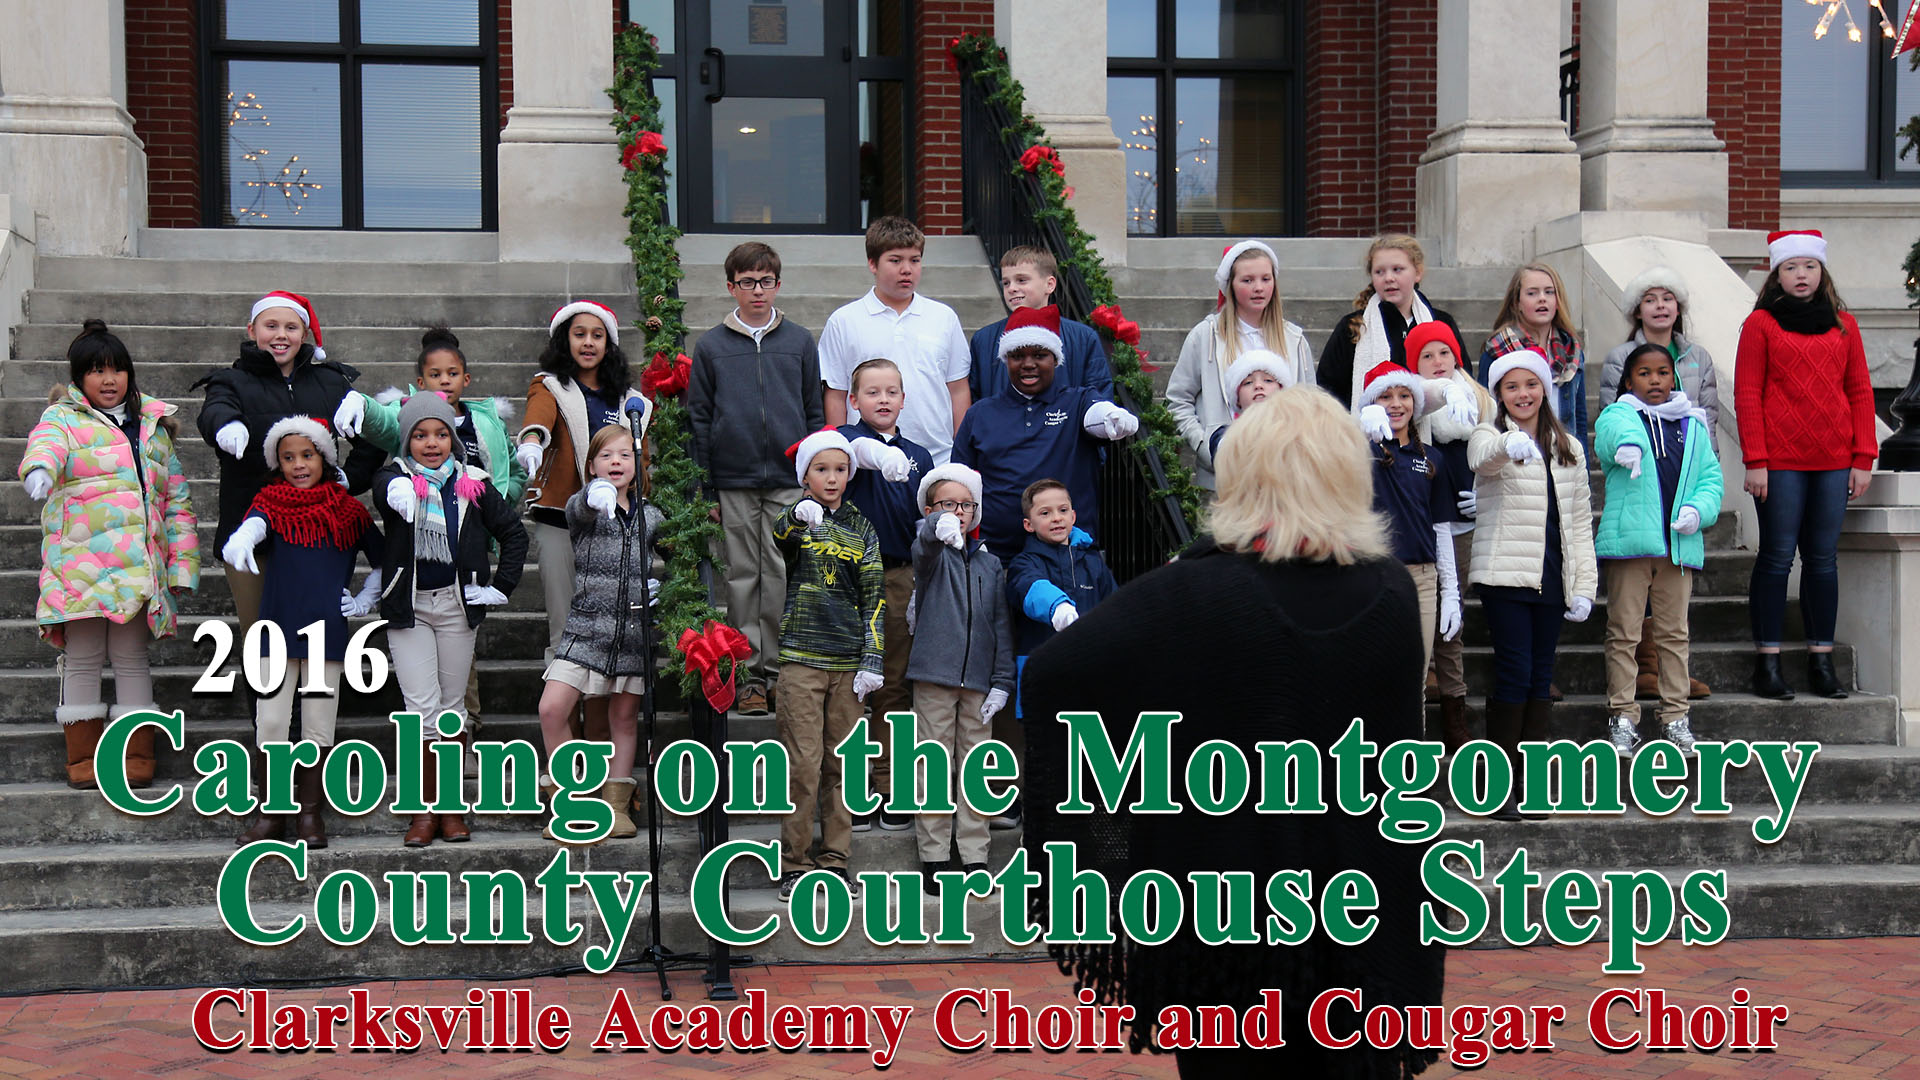 Clarksville Academy Choirs sing Christmas Carols on the Montgomery